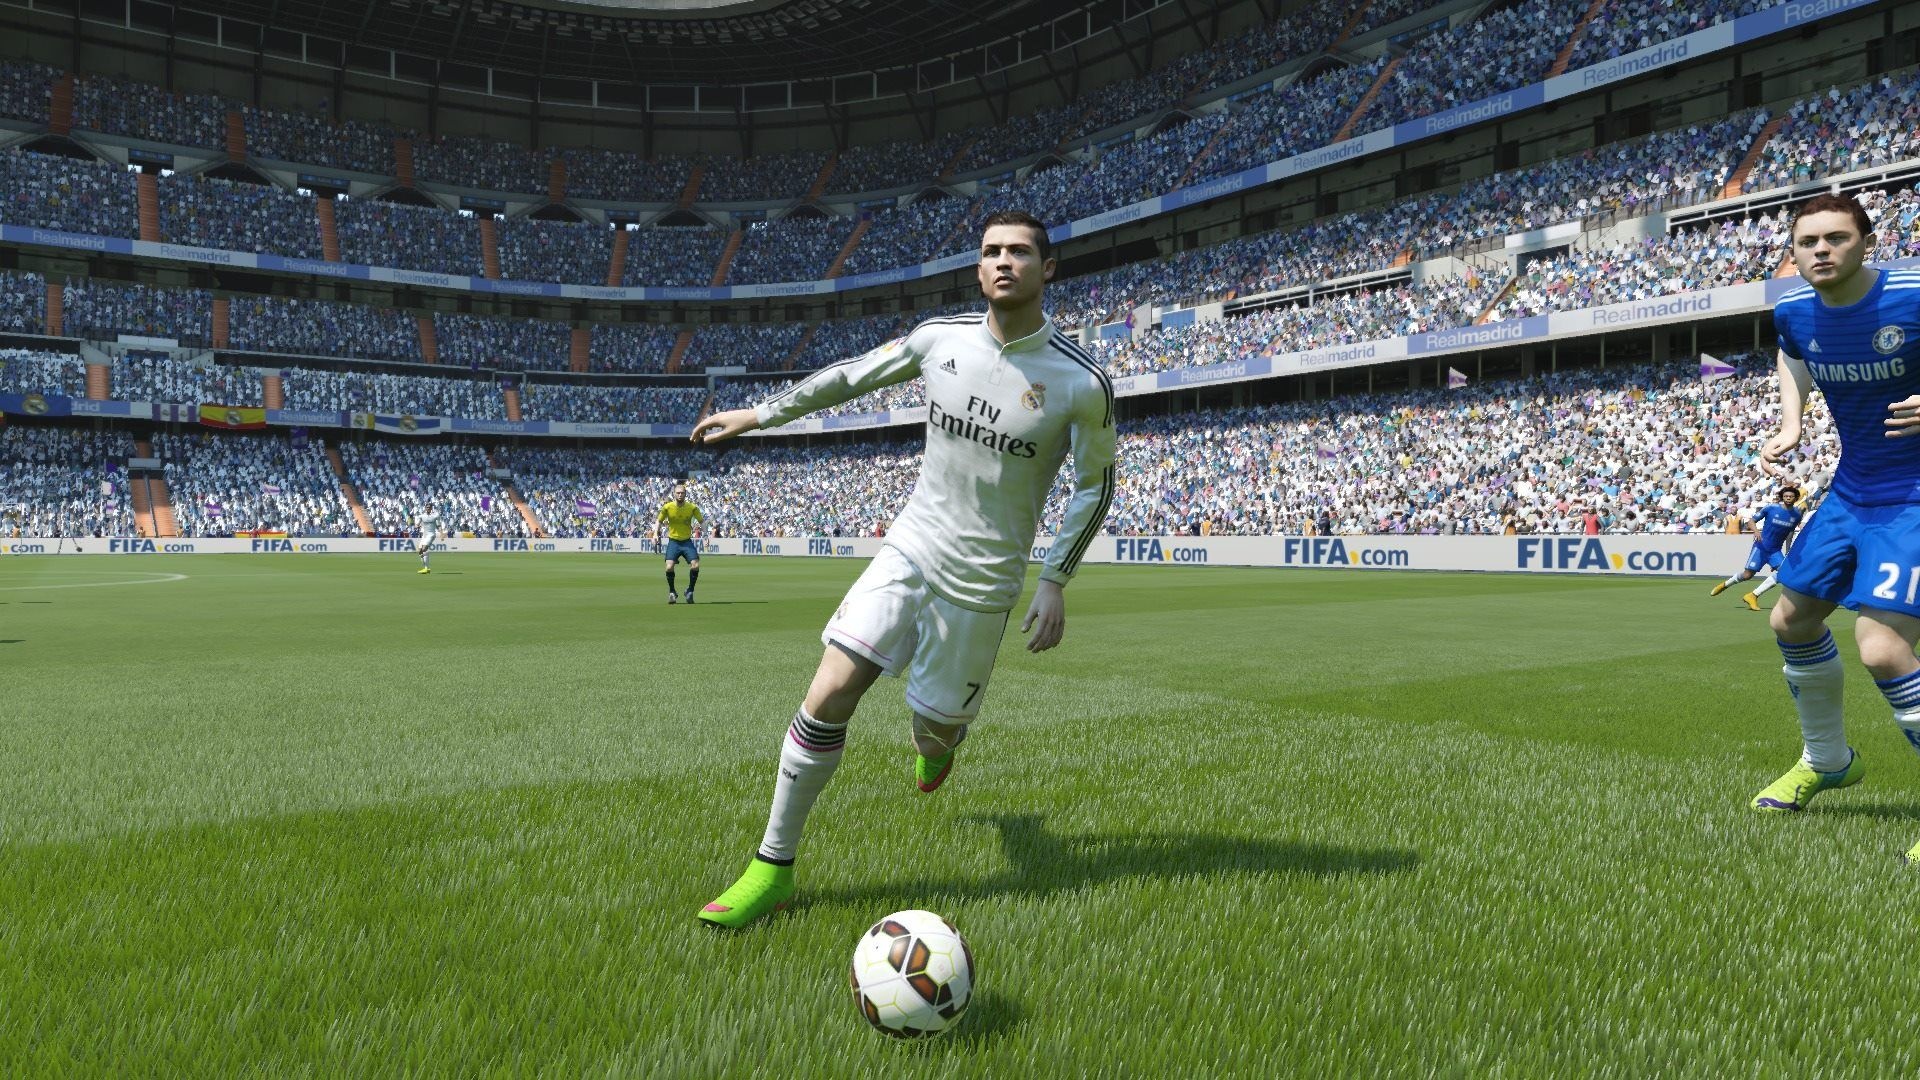 FIFA Soccer (Game): Legacy Edition, Xbox 360, Kick Off, Career Mode, Tournaments. 1920x1080 Full HD Background.